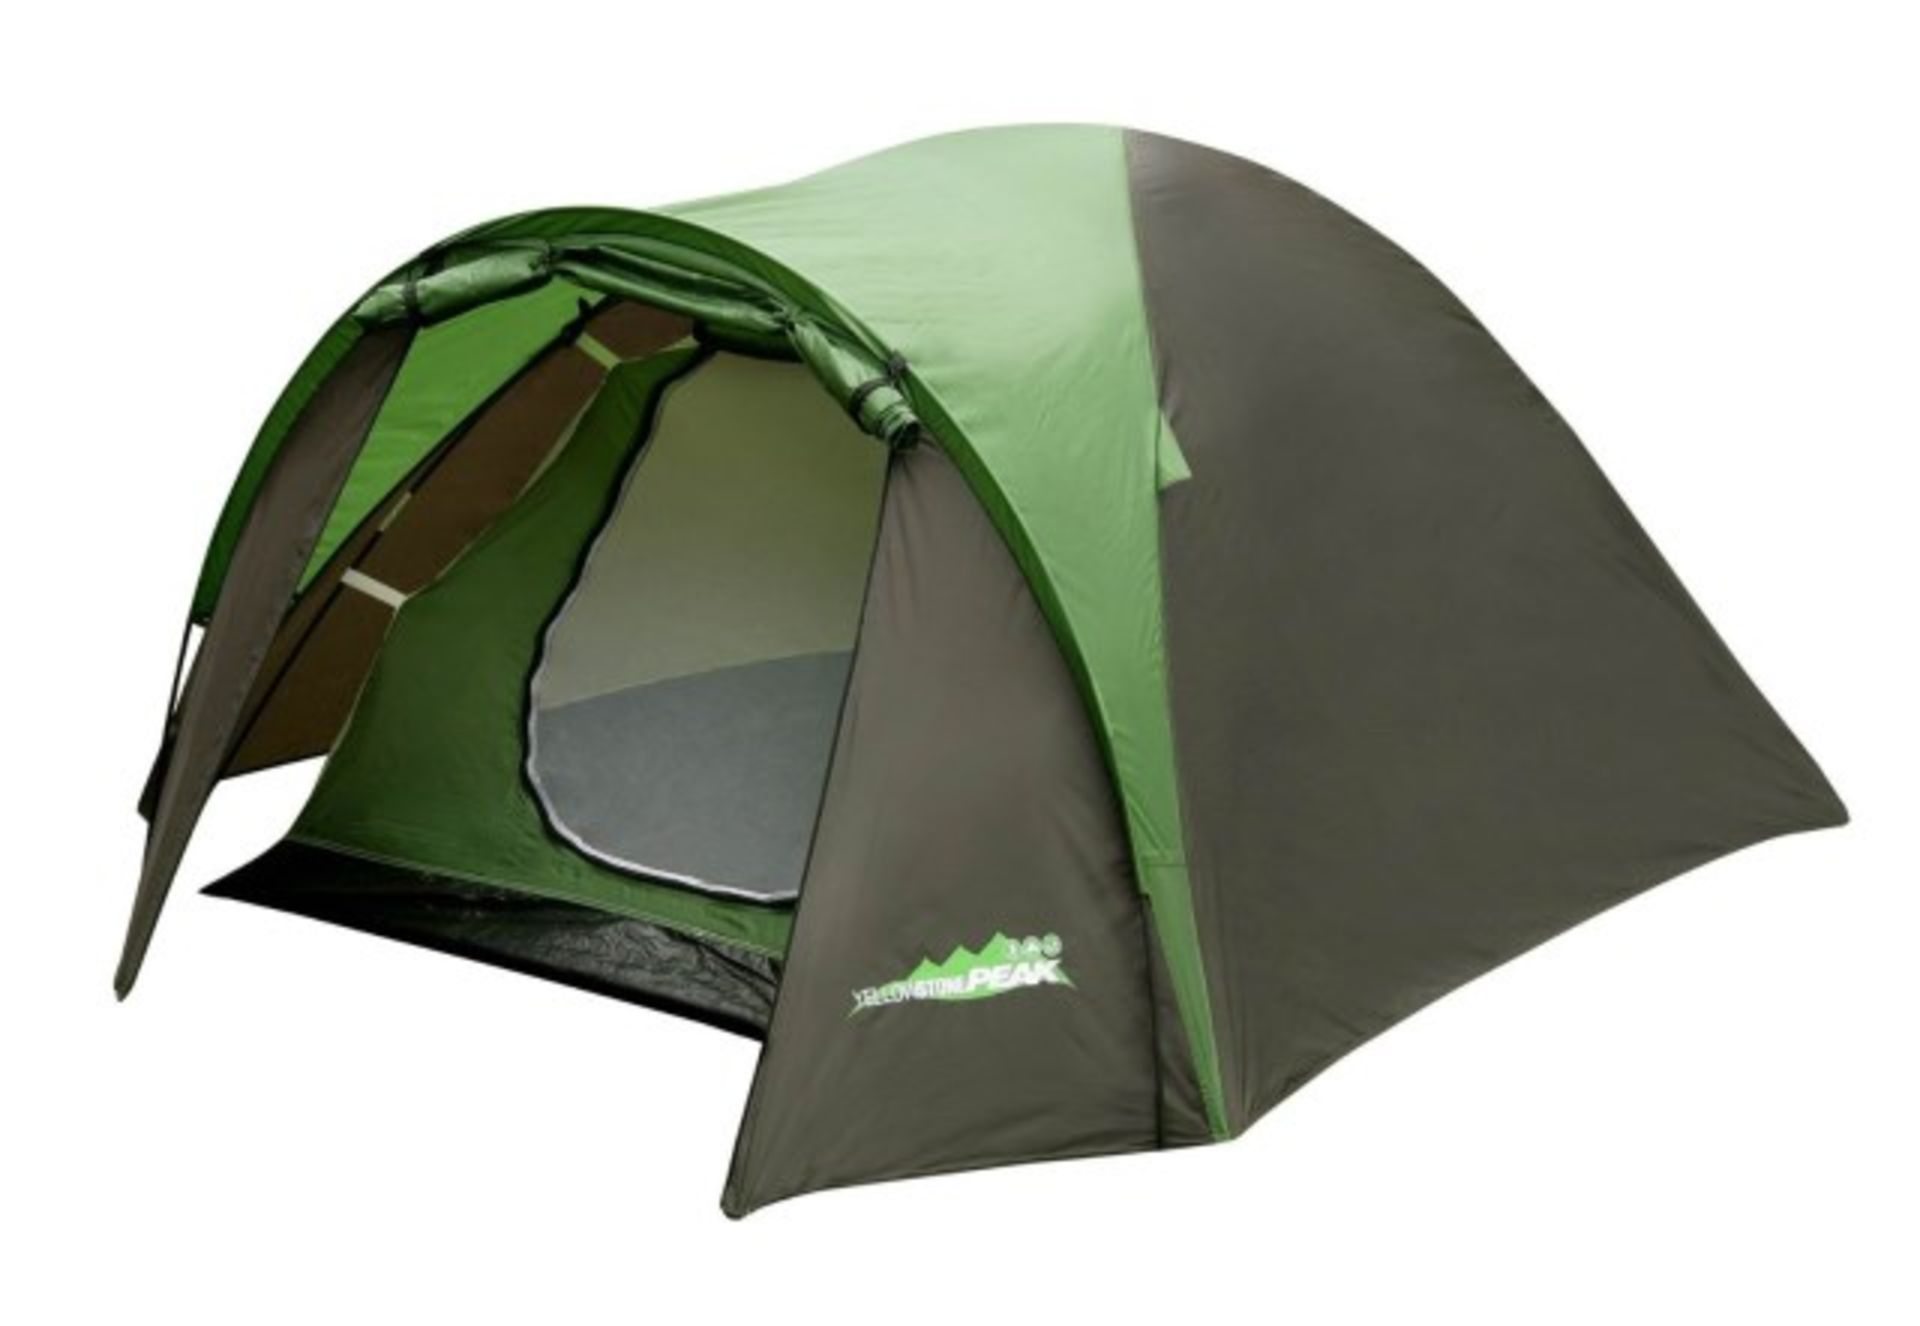 V Grade A 2 Man Mega Dome Tent With Porch Canopy X 2 YOUR BID PRICE TO BE MULTIPLIED BY TWO